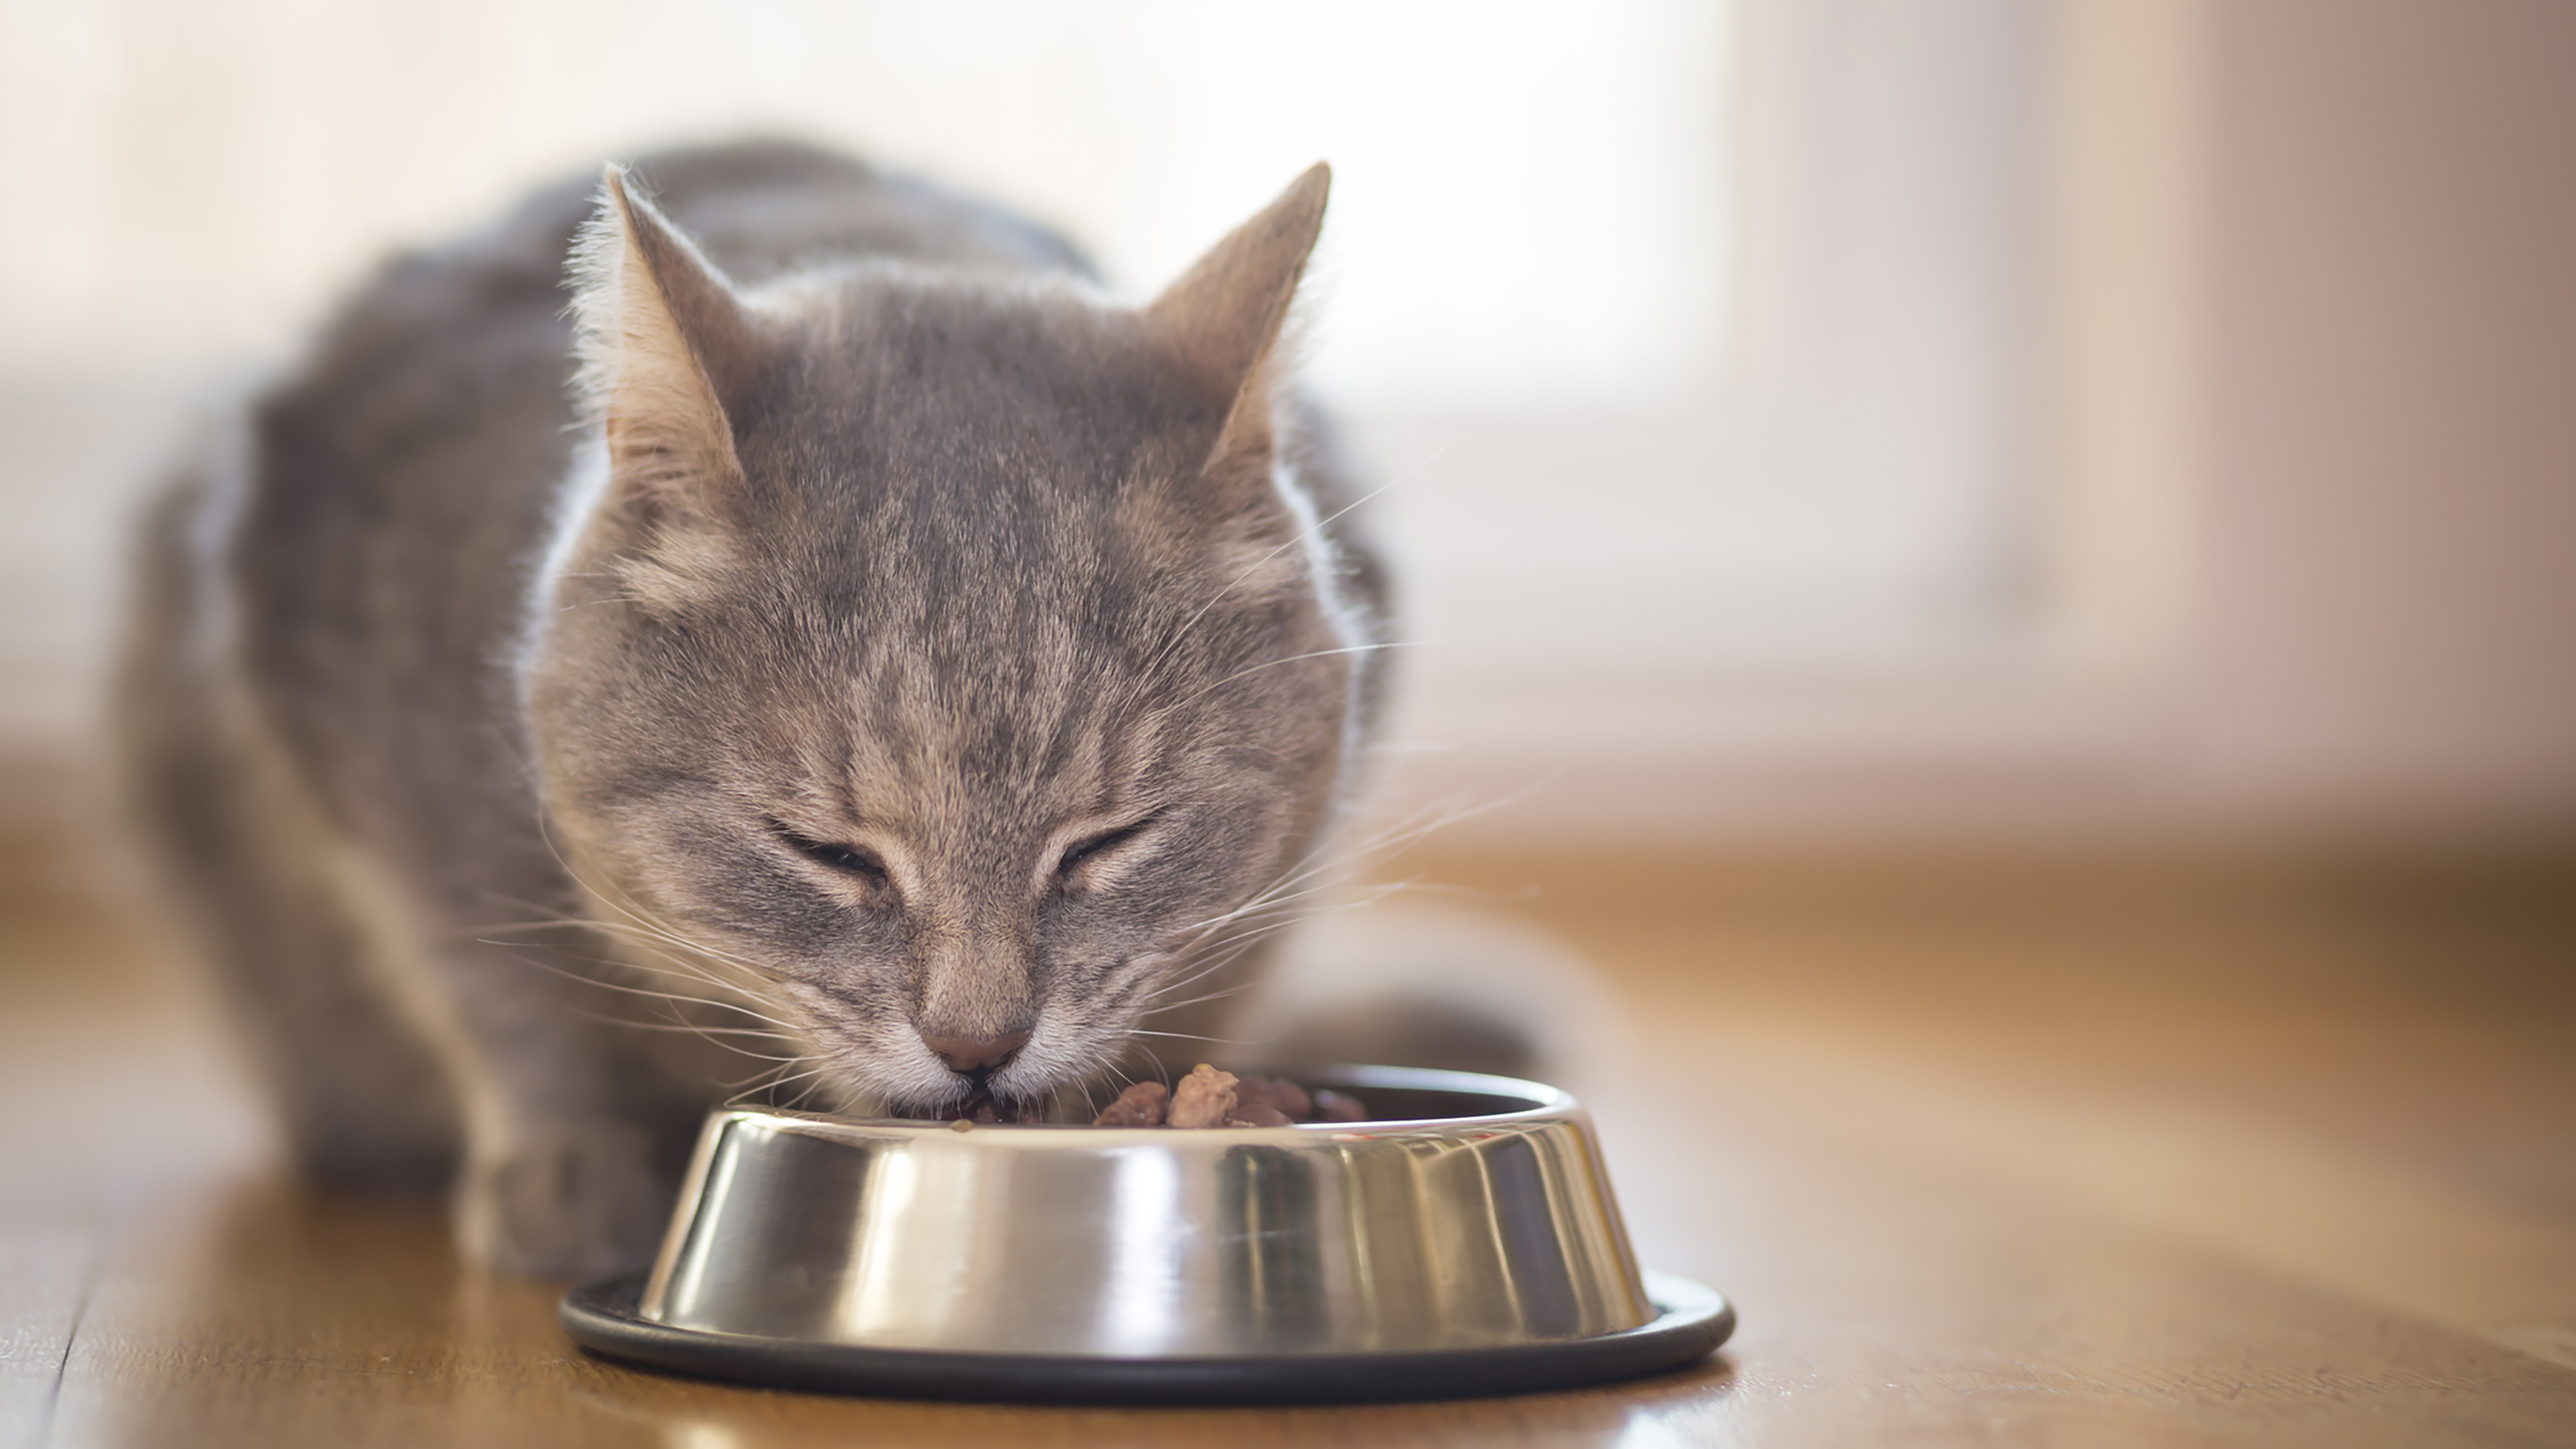 https://www.vets4pets.com/siteassets/species/cat/cat-eating-out-of-food-bowl.jpg?w=585&scale=down